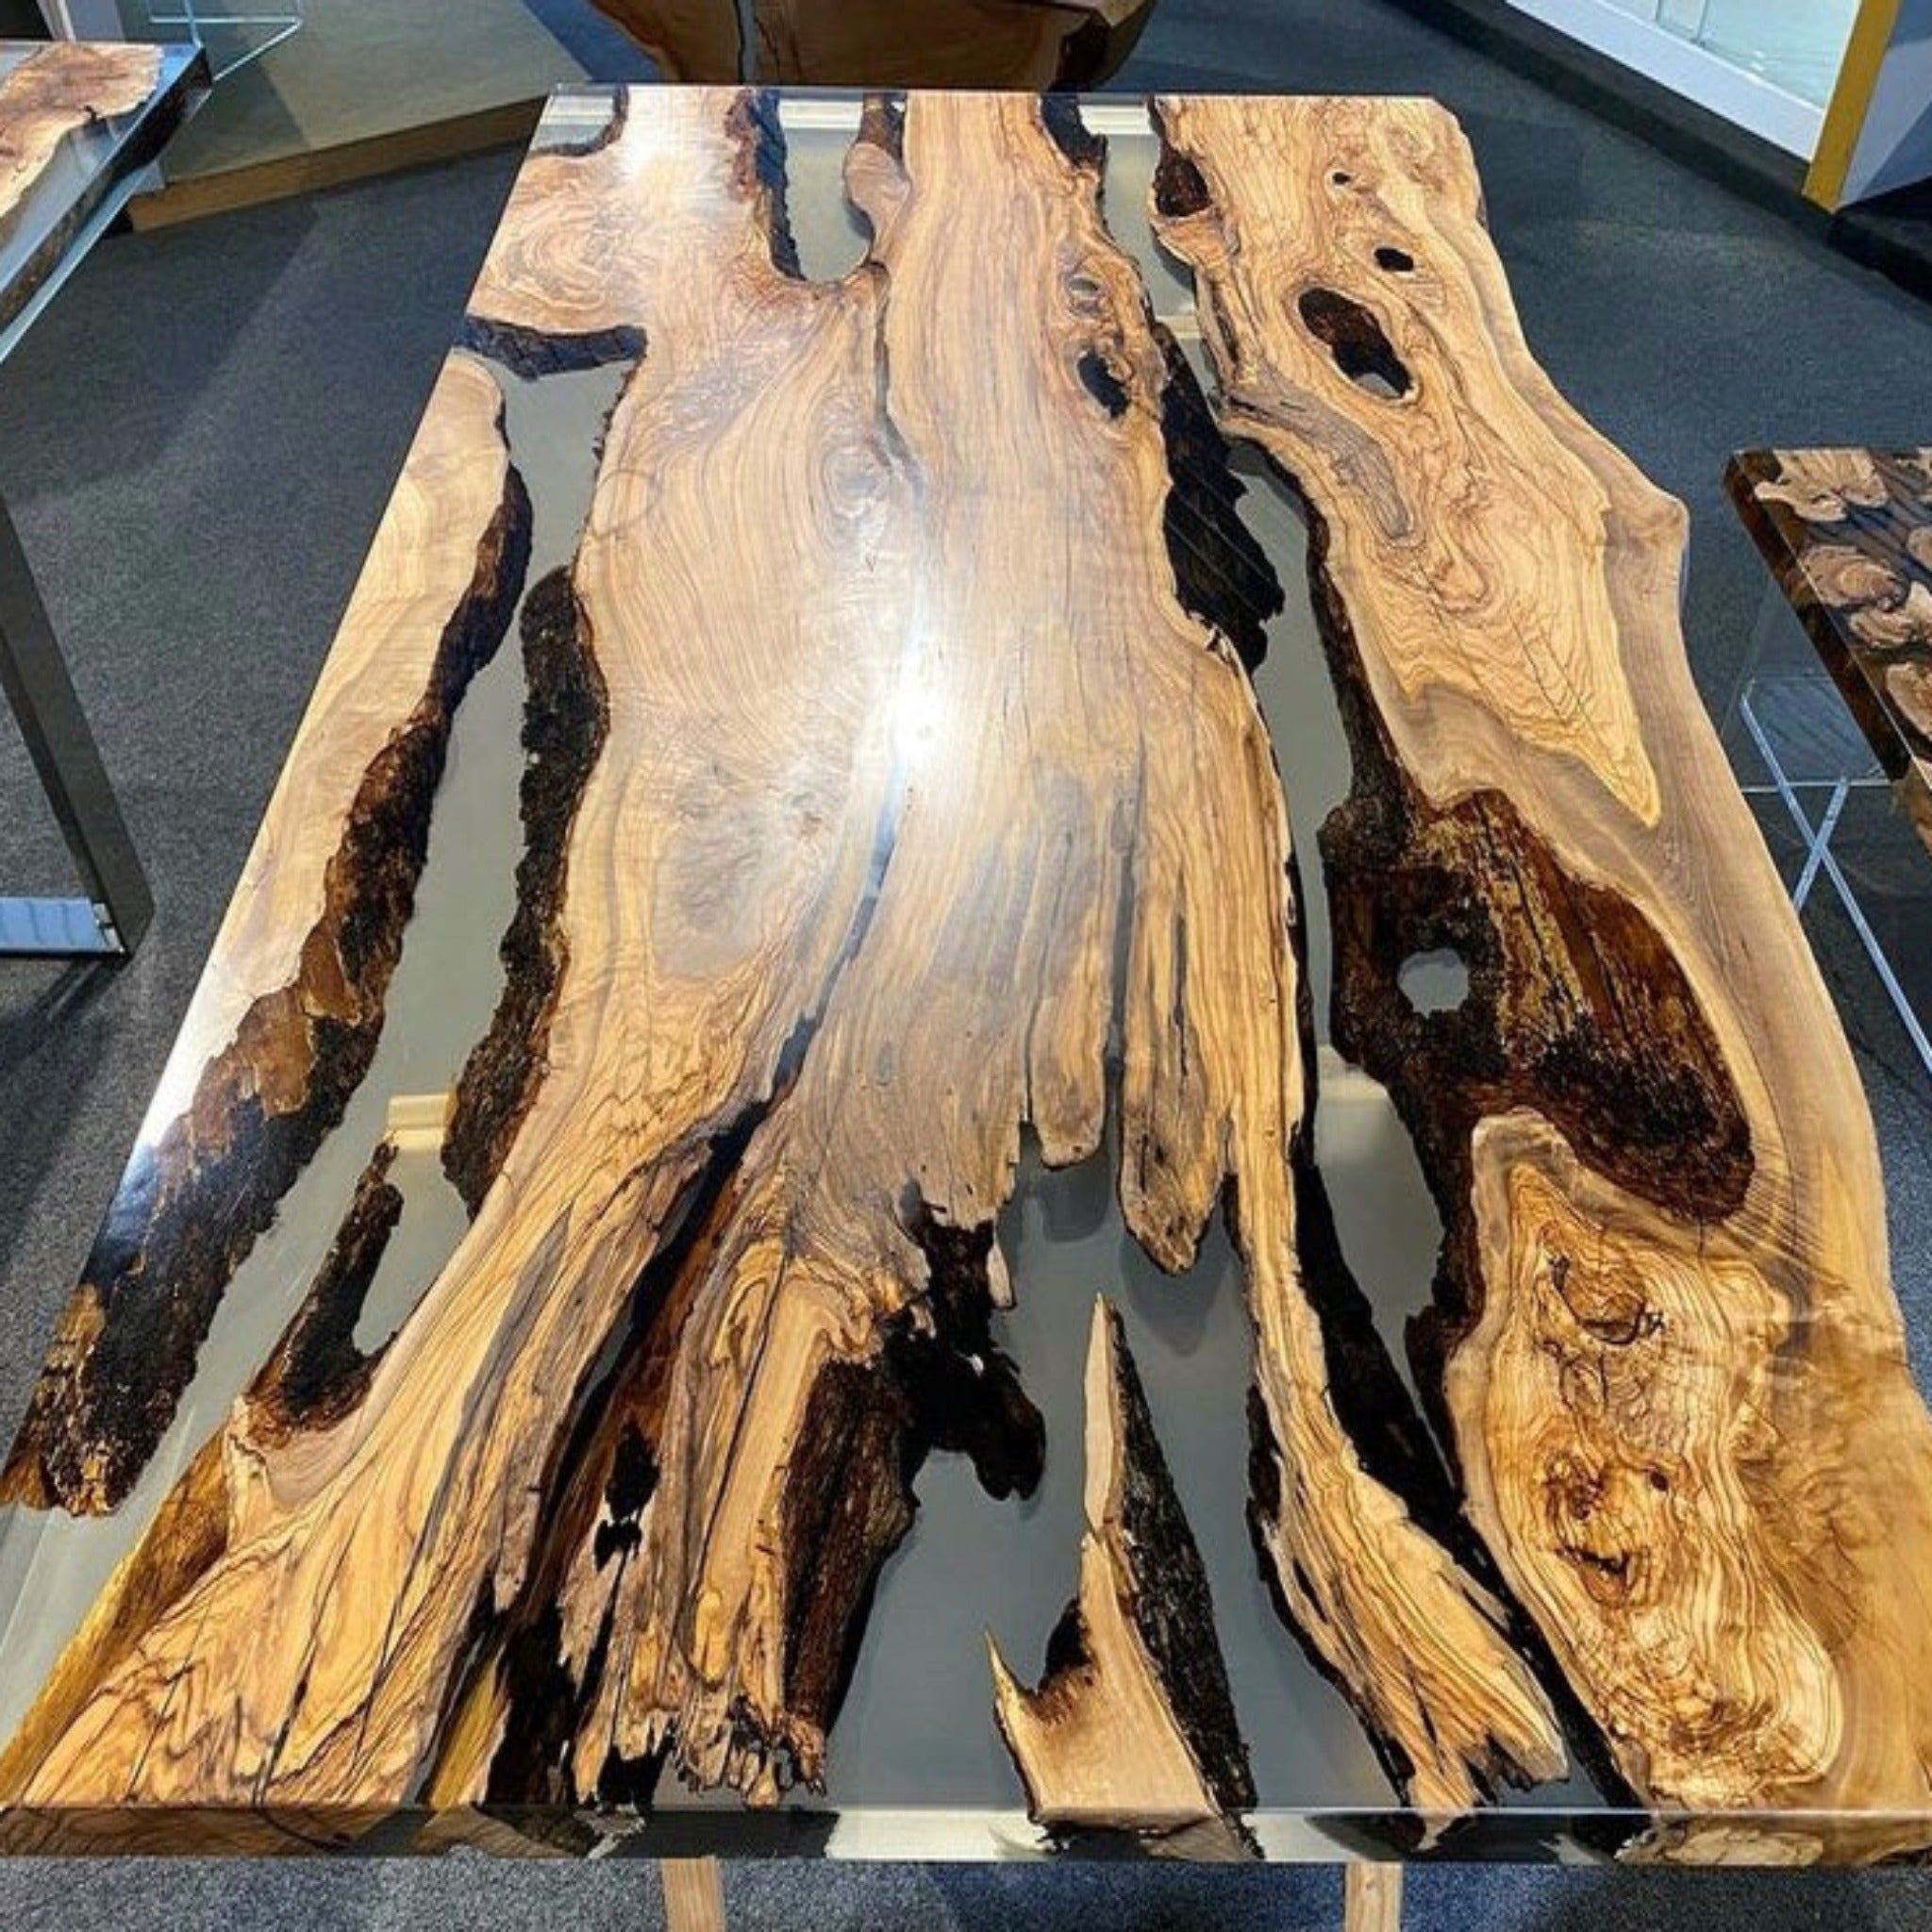 Epoxy Table, Live Edge Wooden Table, Epoxy Resin River Table, Natural  Wood,Dining Table, Natural Epoxy Table, Resin Table 42 x 24 Inch, Piece  Of